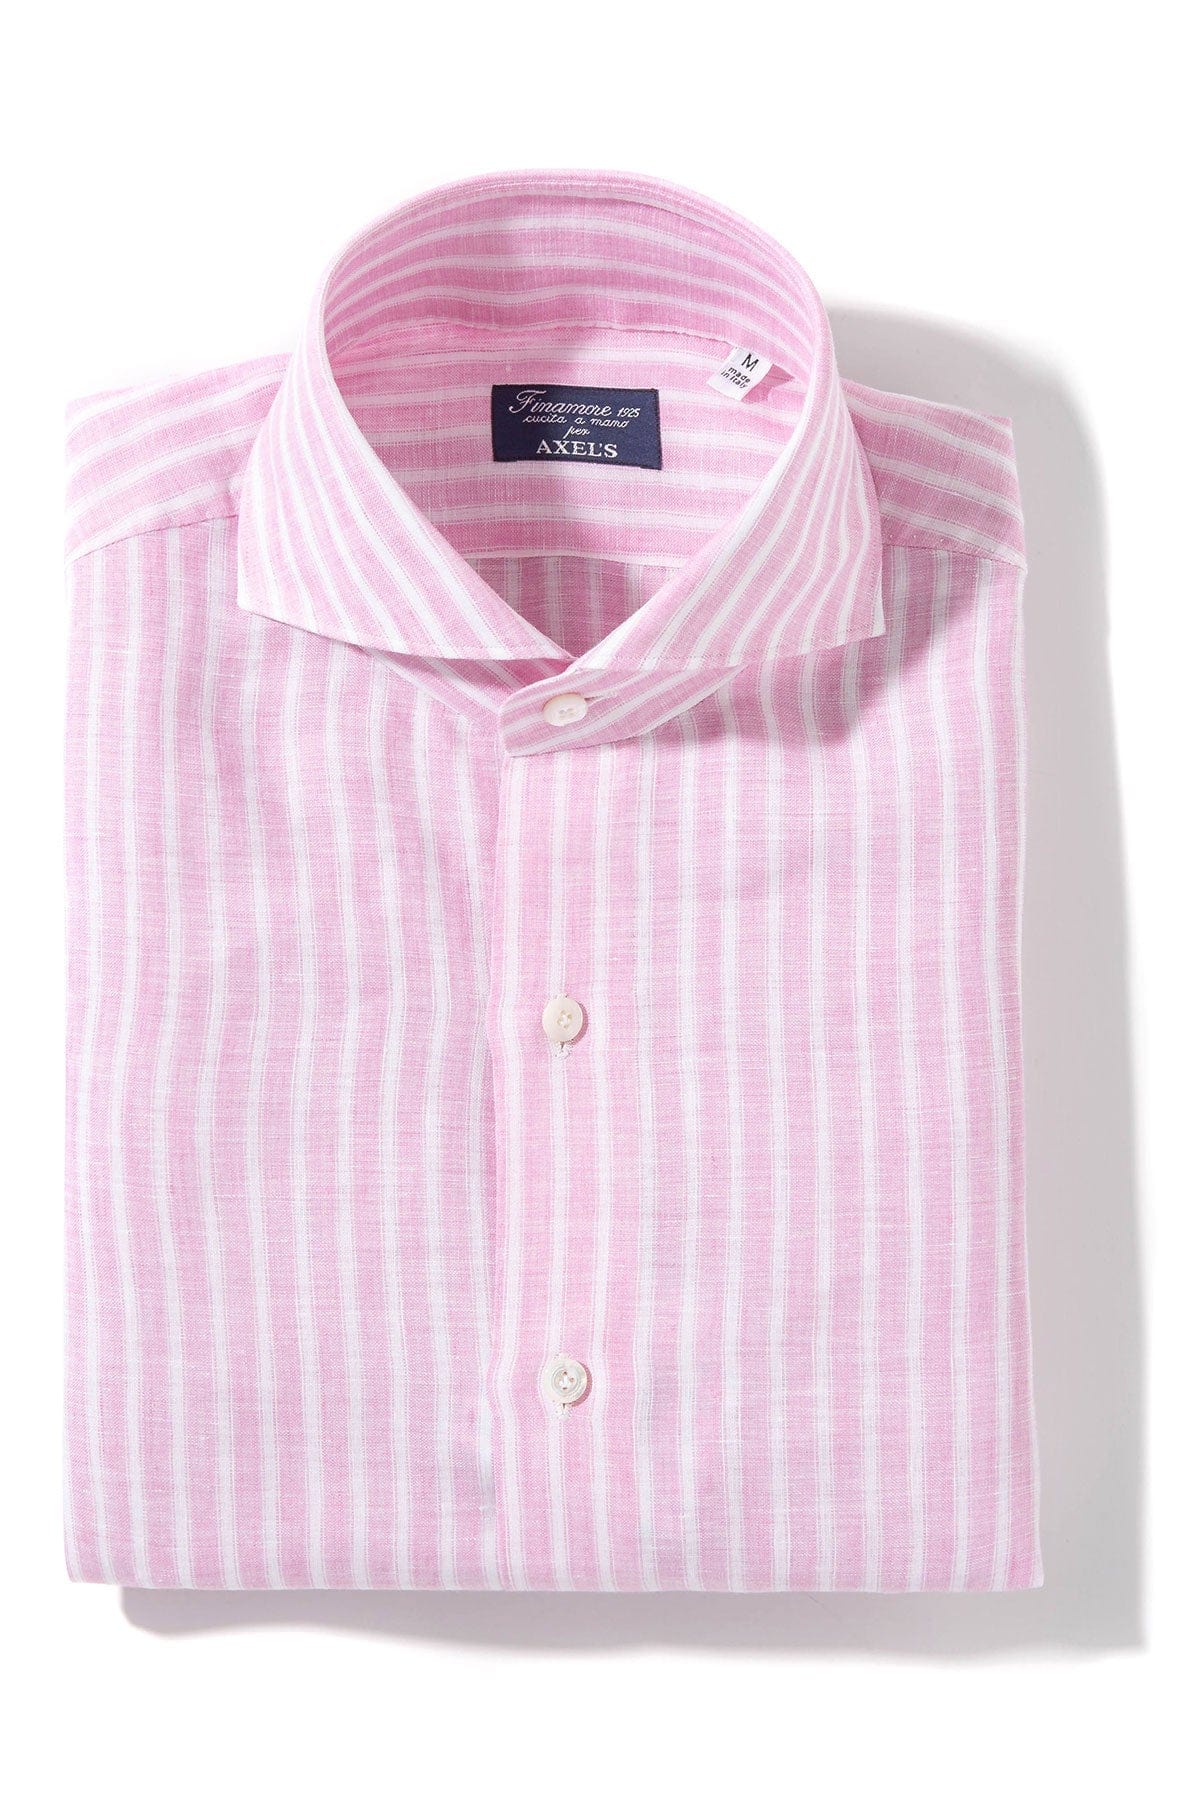 Bonobo Linen Washed Bengal Stripe In Pink - AXEL'S